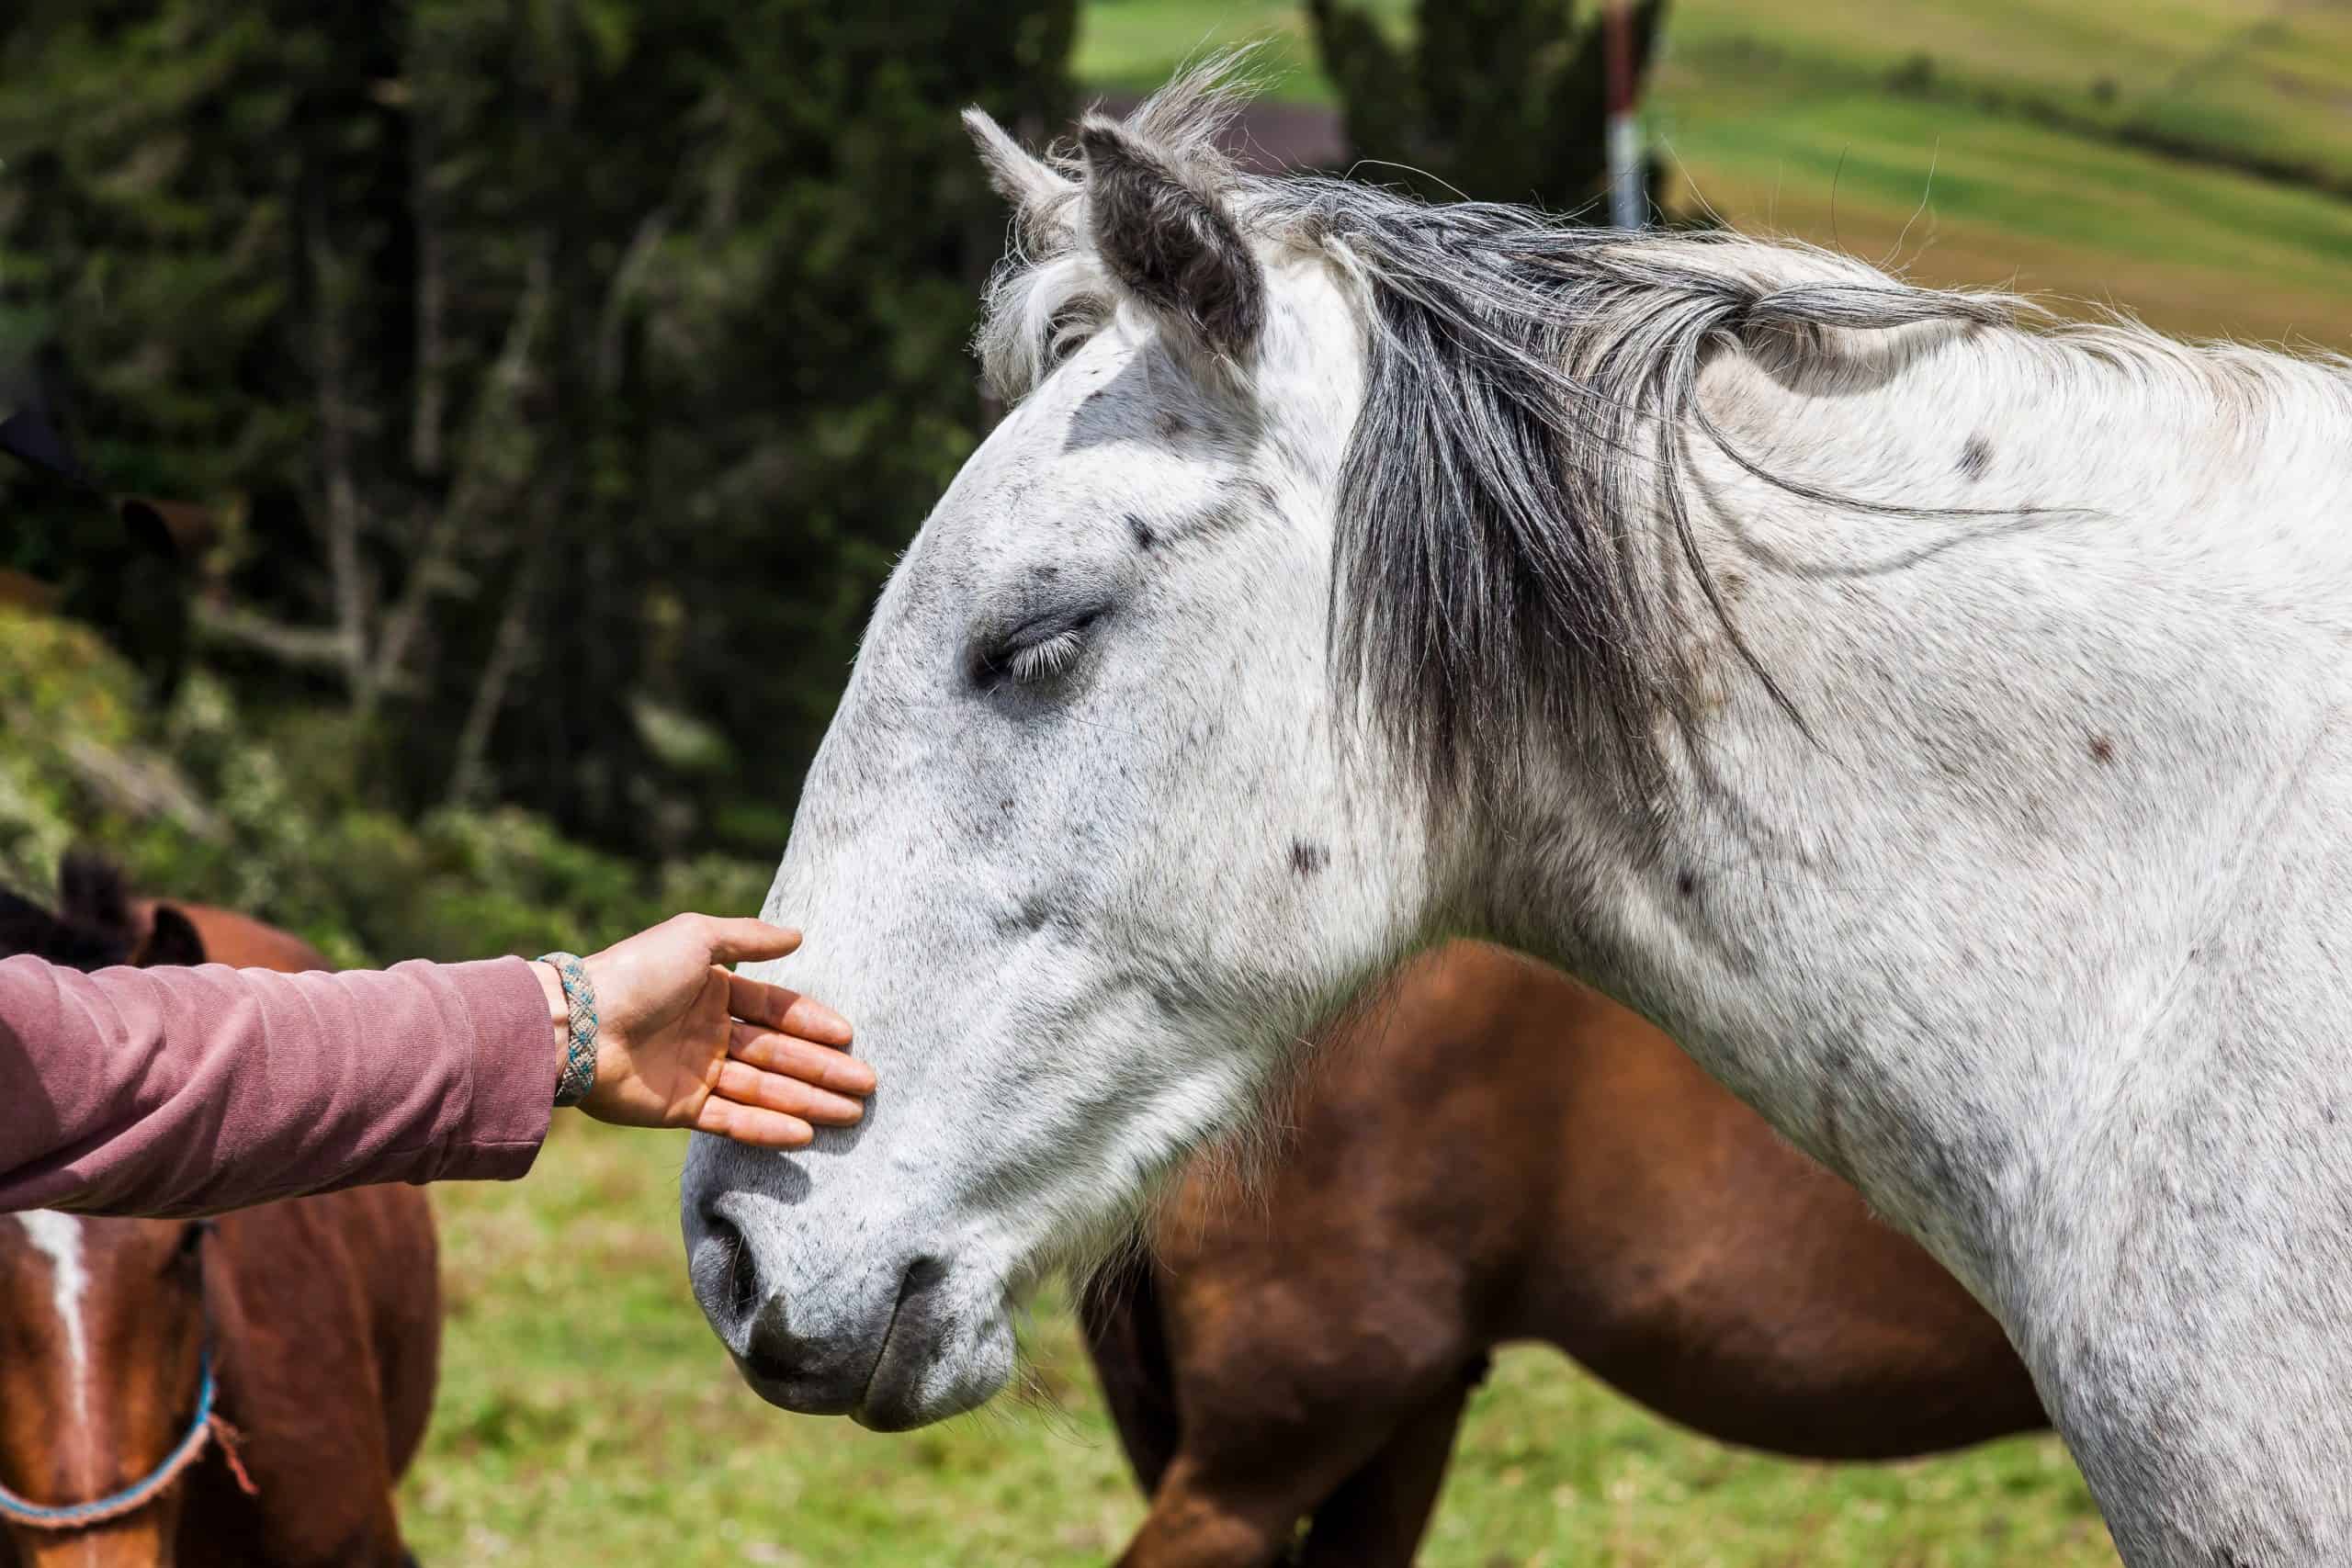 15 Horse Terms That Really Confuse Non-Horse People